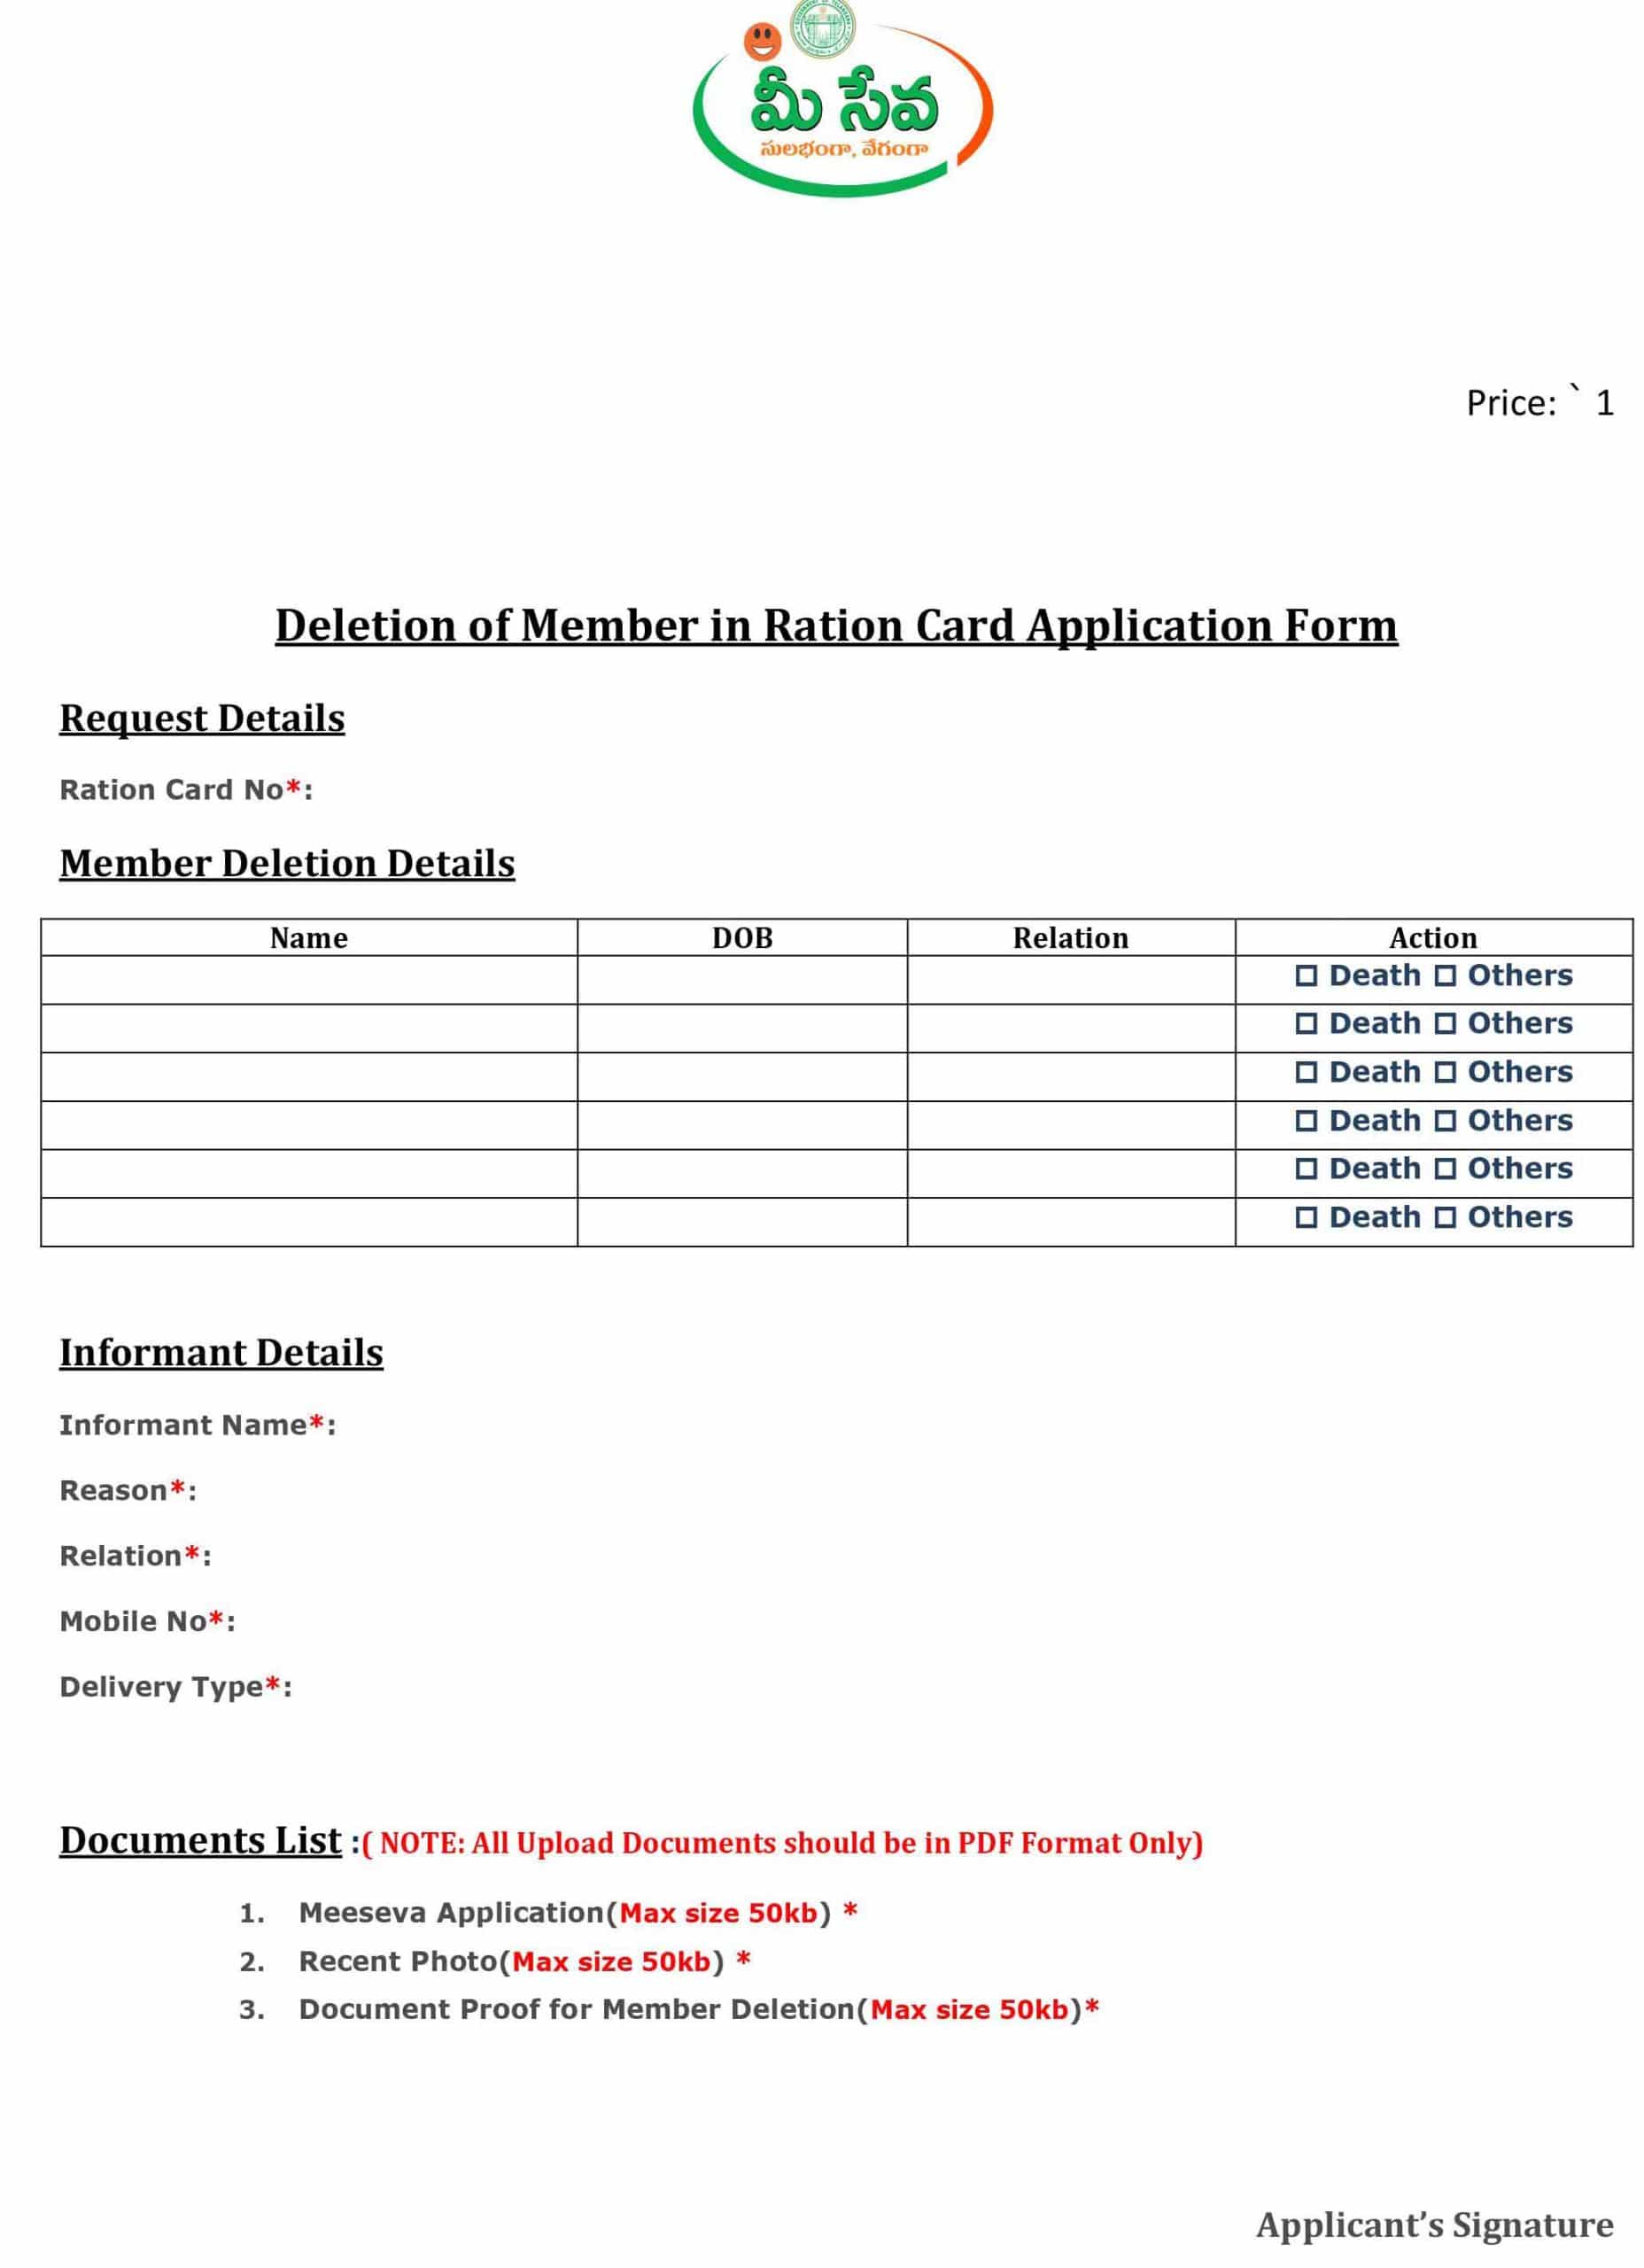 application letter for removing name from ration card after death